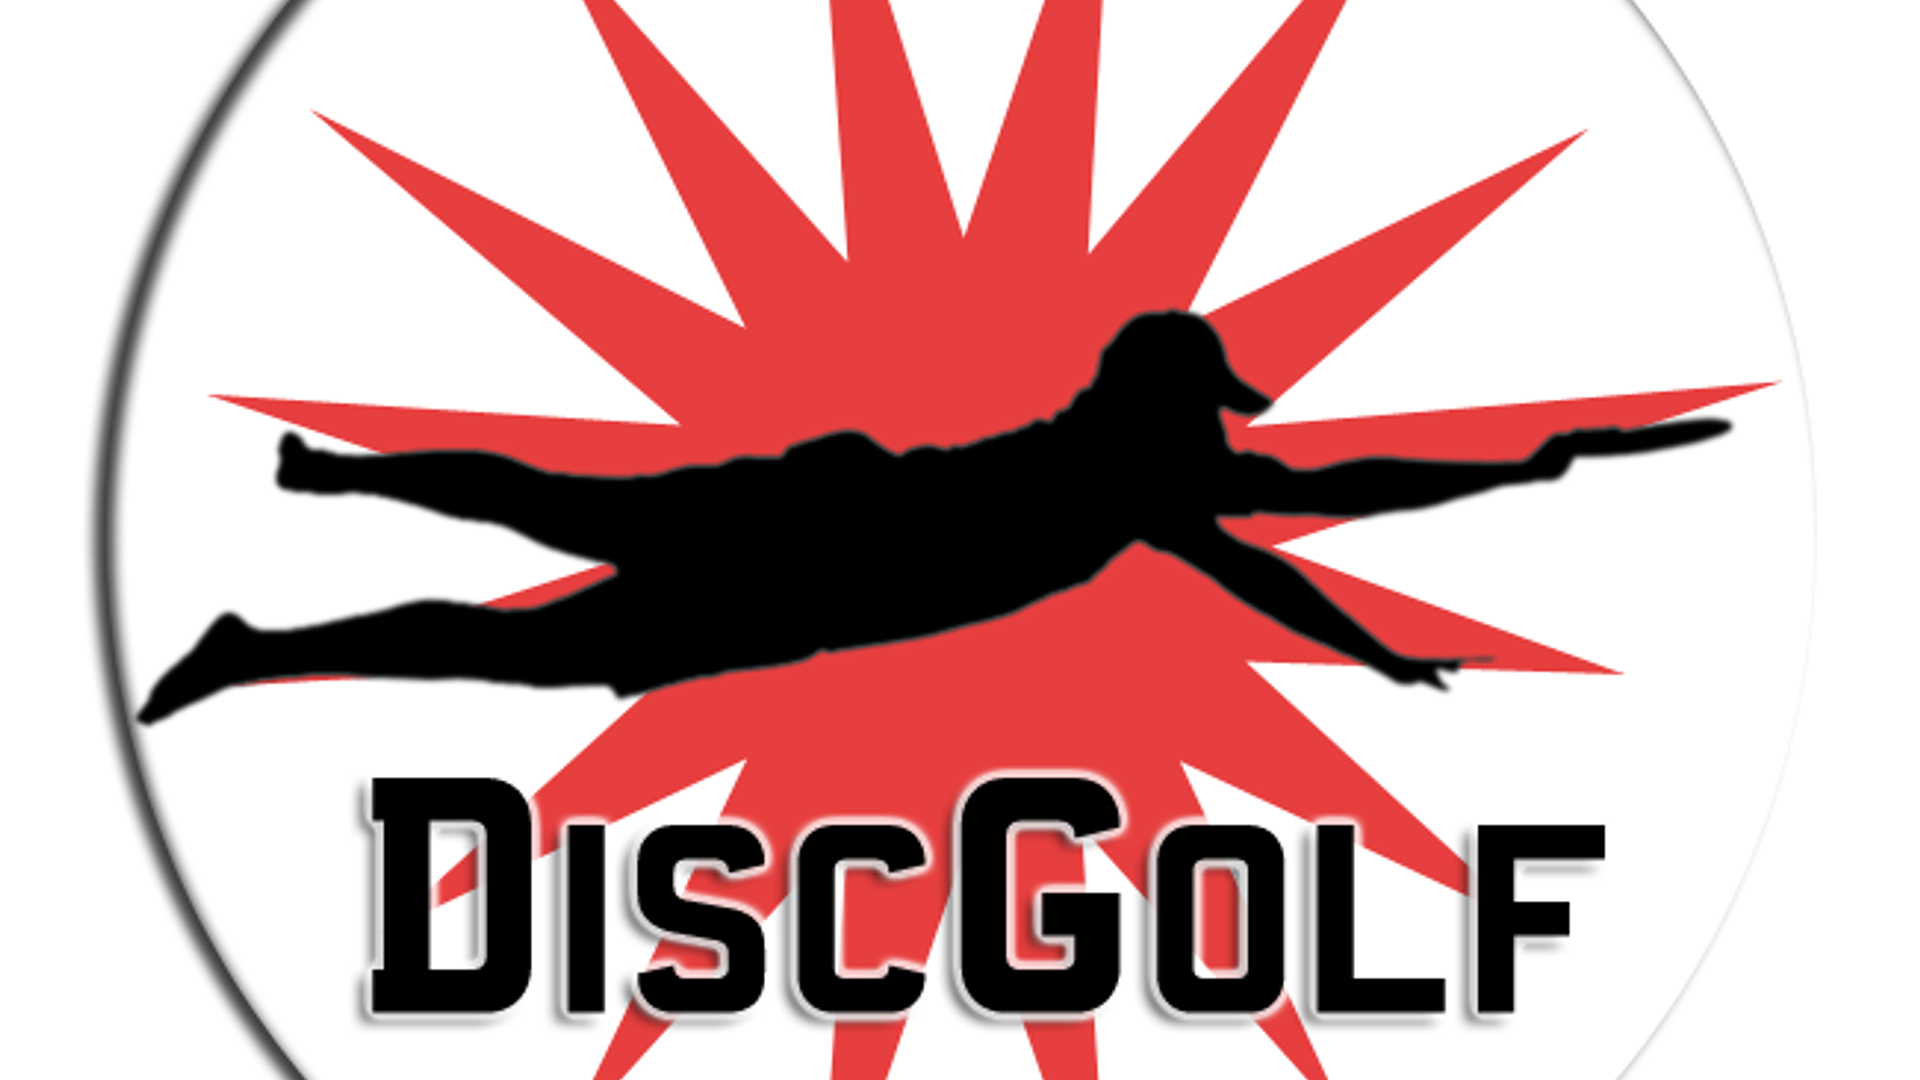 Project DiscGolf